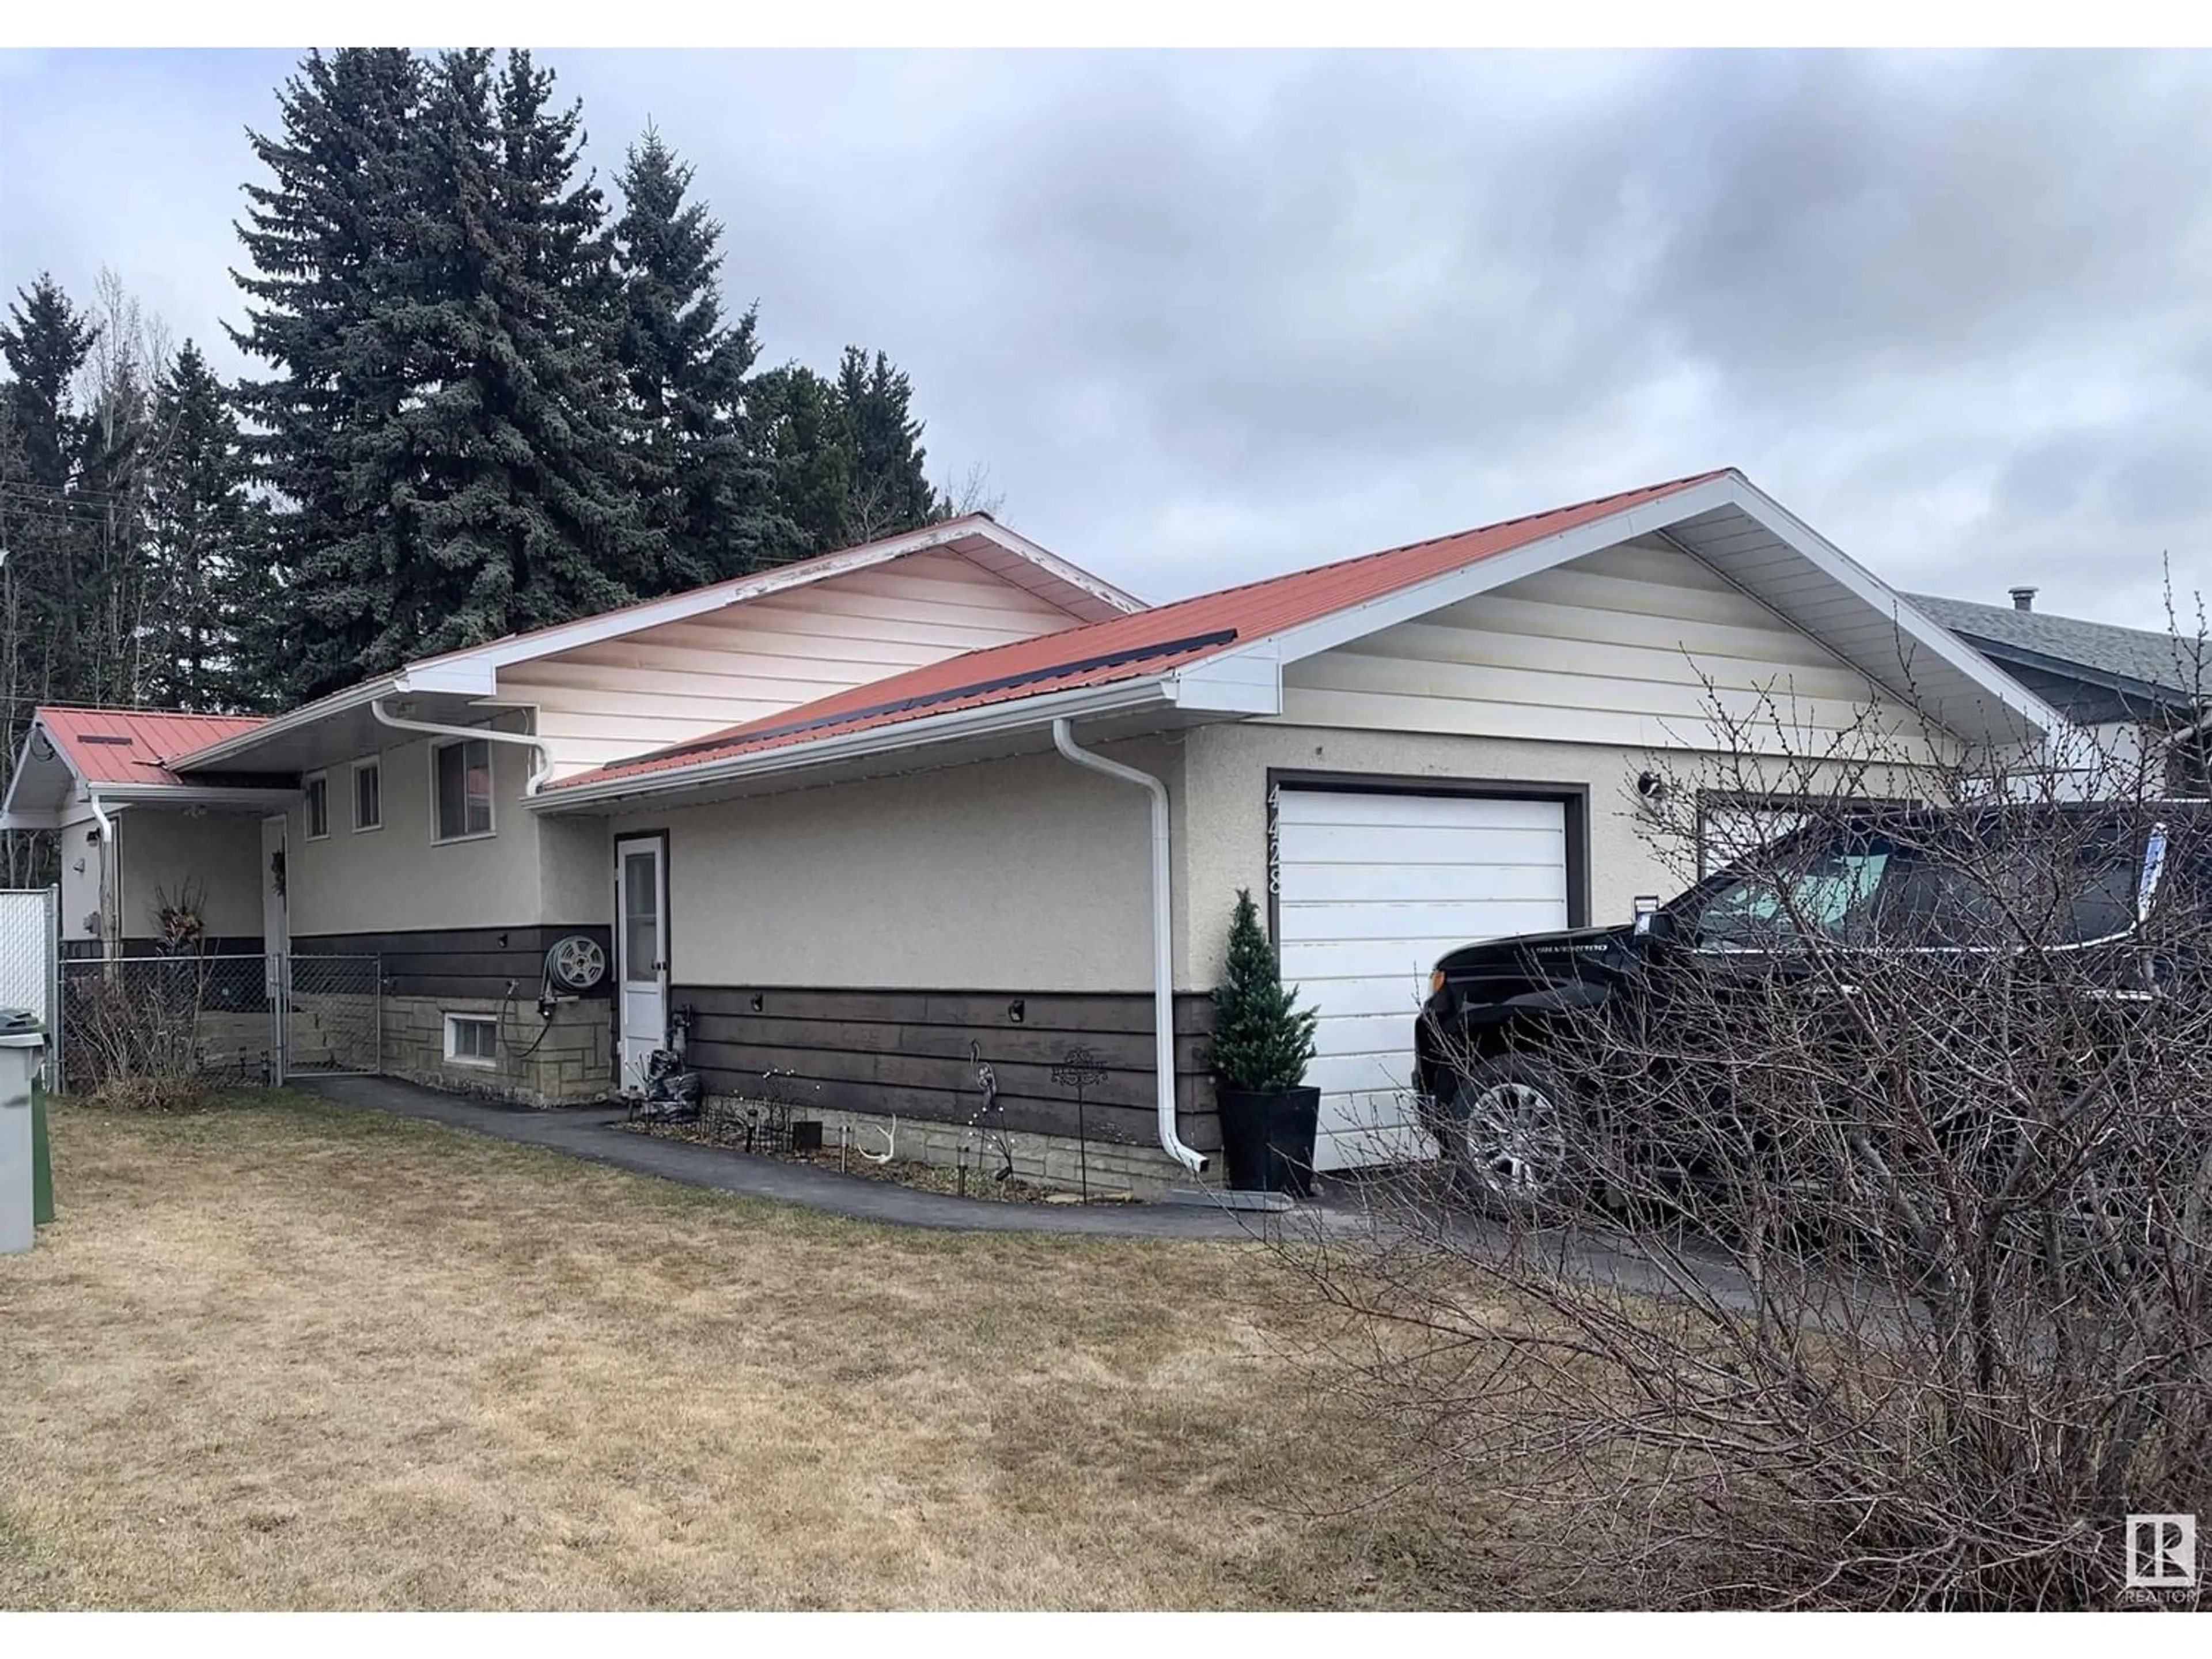 Home with stucco exterior material for 4428 6 Ave, Edson Alberta T7E1B6